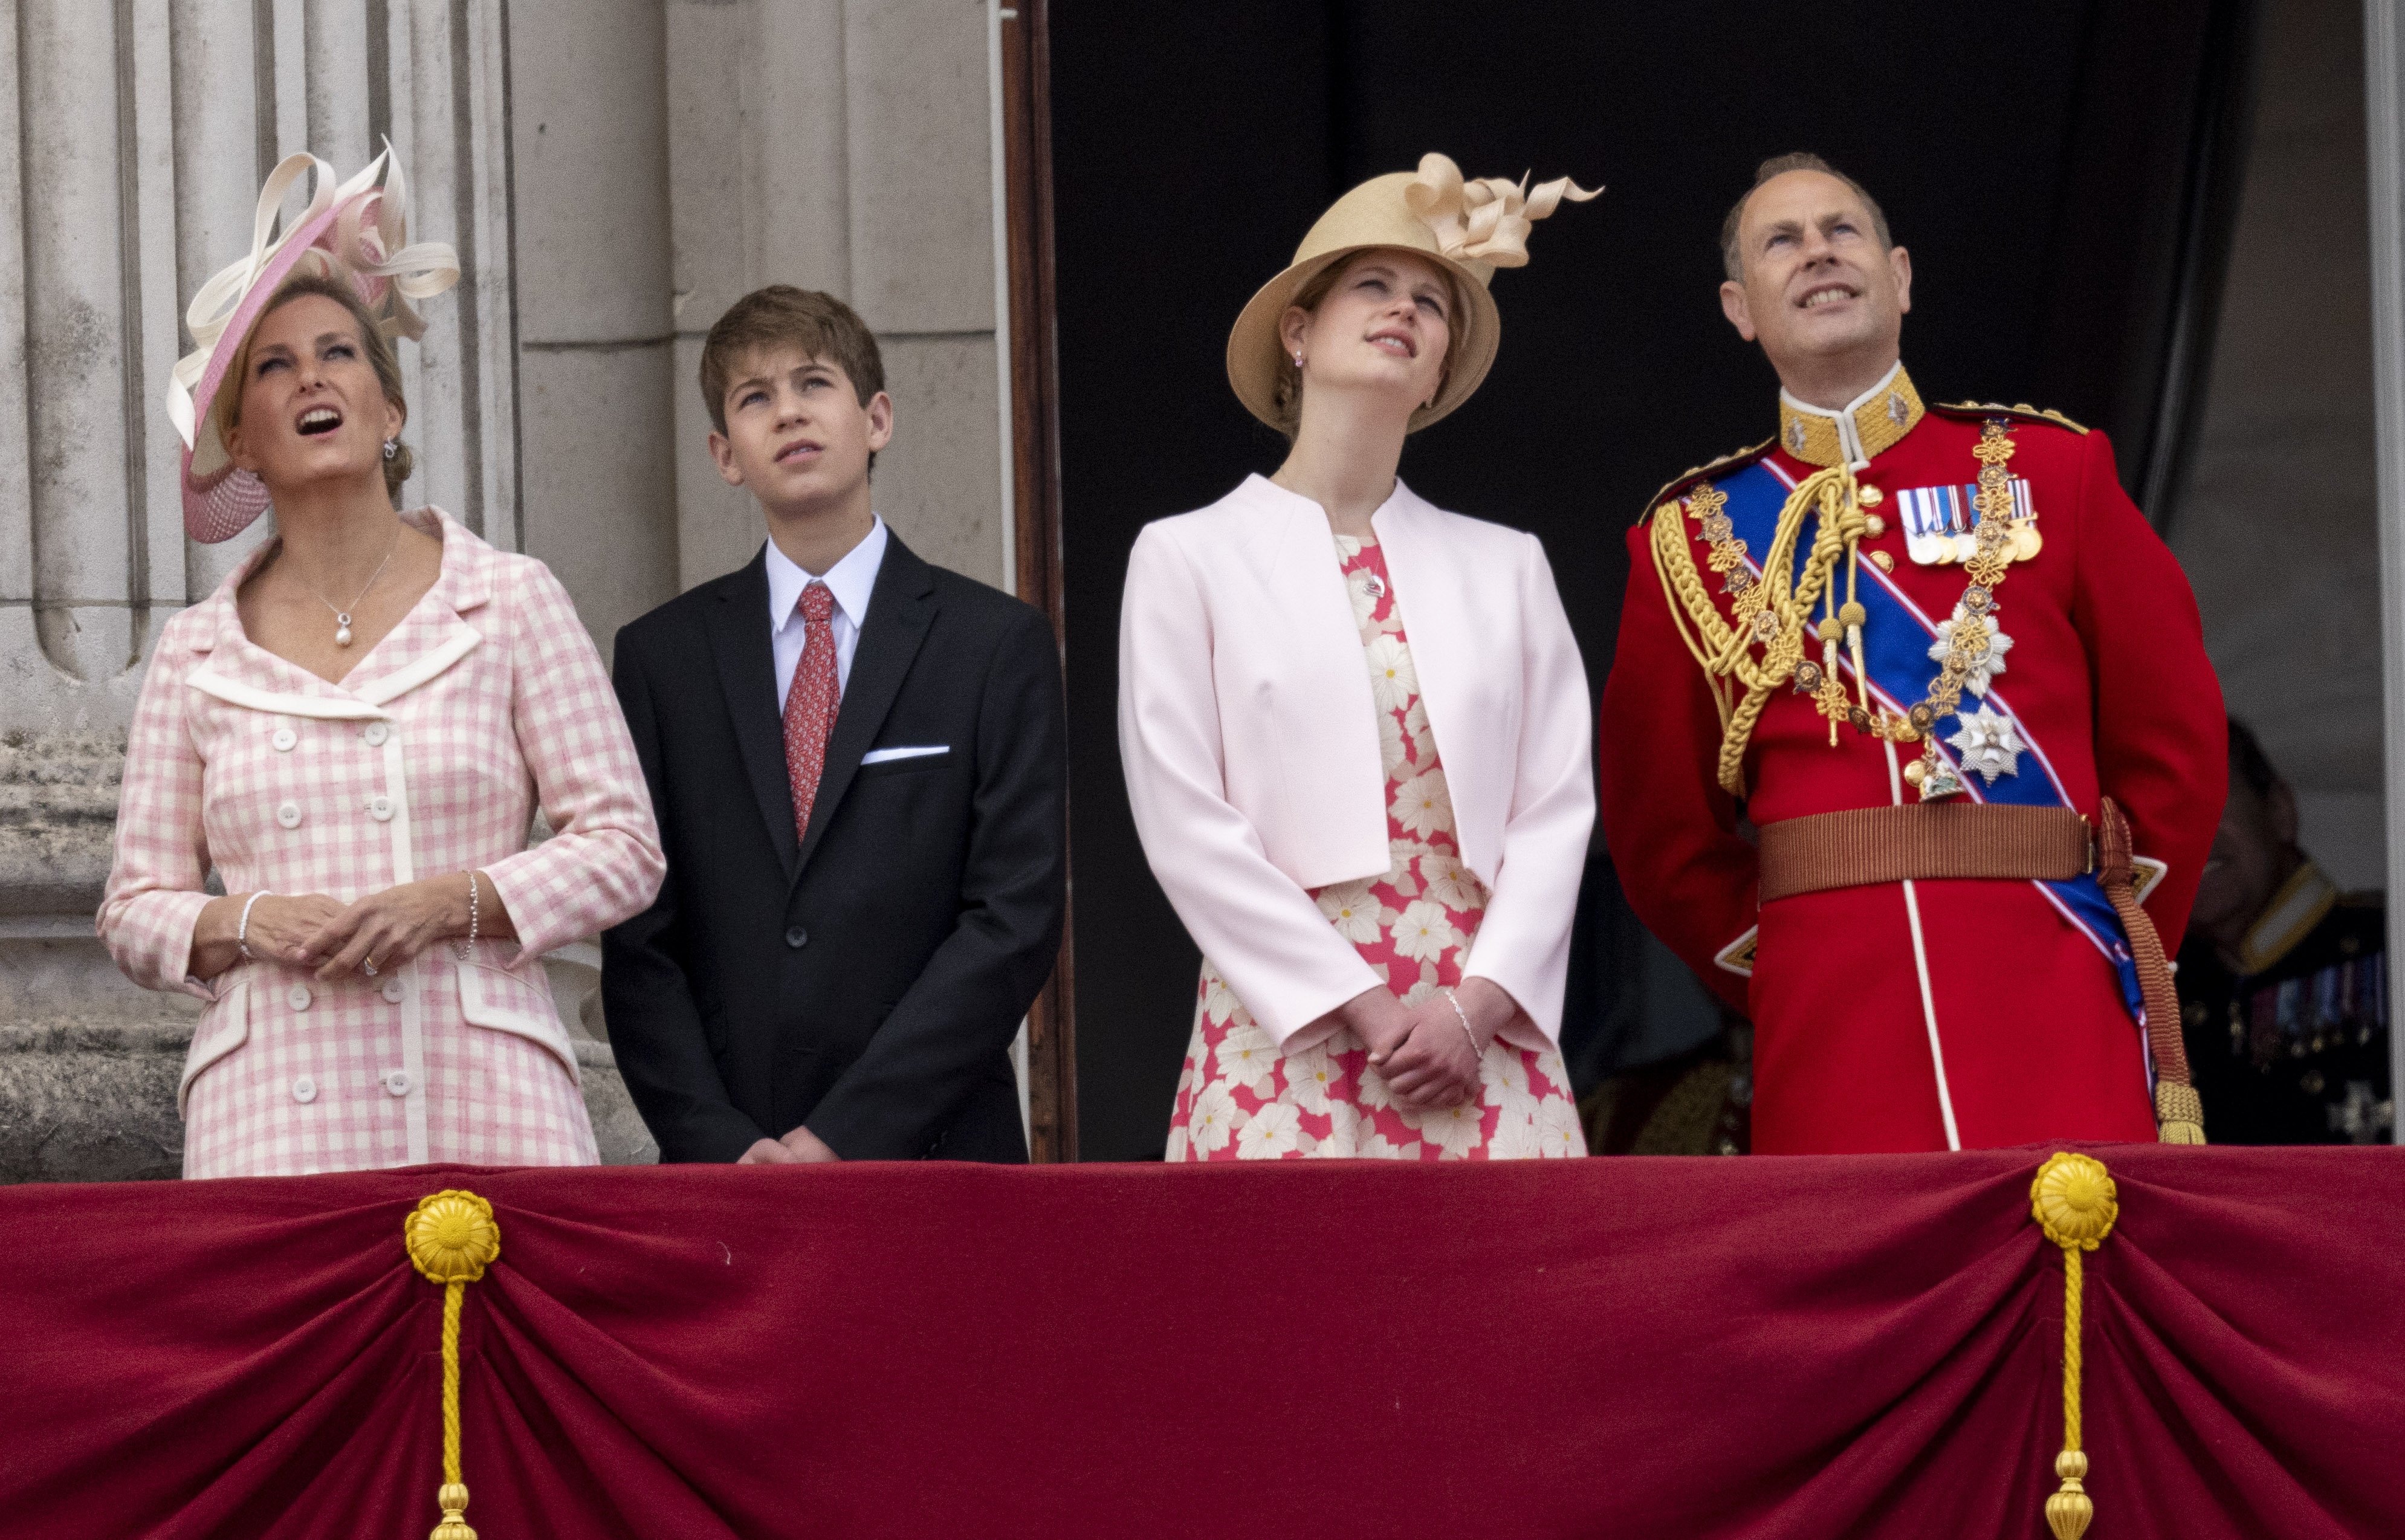 Sophie, Countess of Wessex and Prince Edward, Earl of Wessex with James Viscount Severn and Lady Louise Windsor during Trooping the Colour on June 2, 2022 in London, England | Source: Getty Images